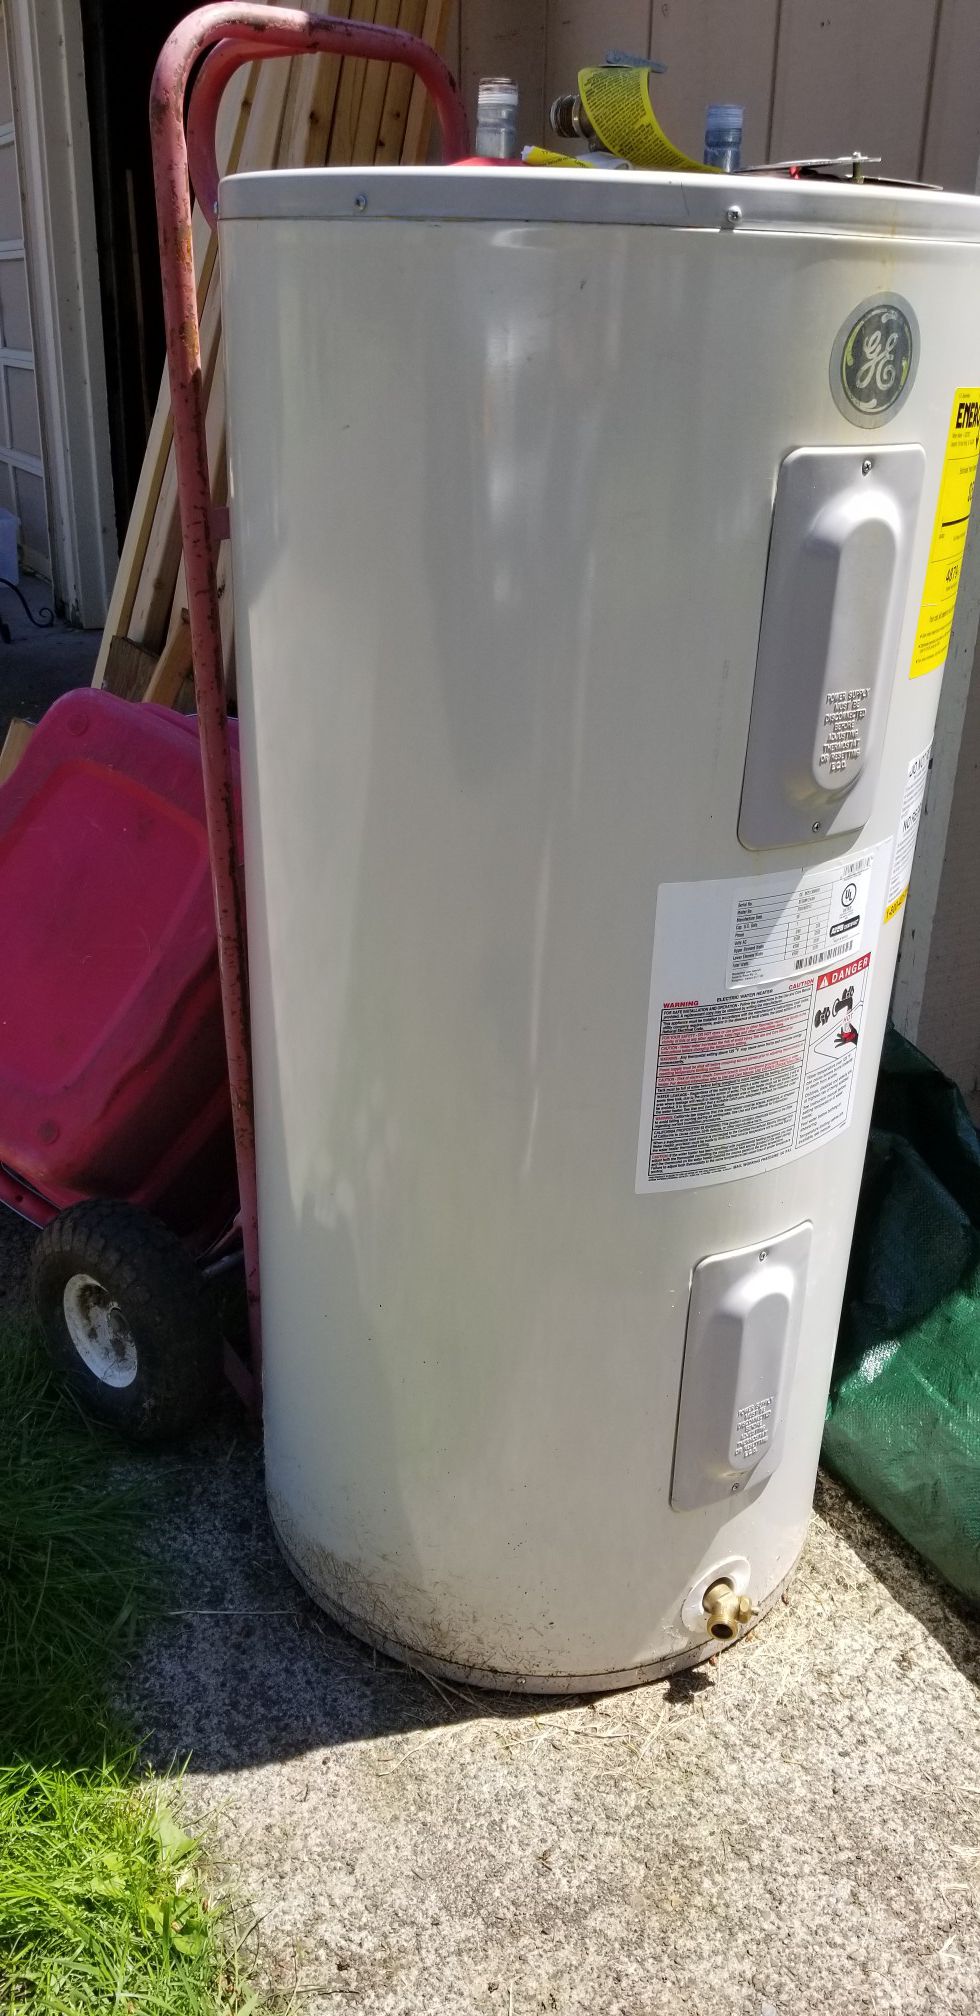 GE water heater.. it works fine just needed a bigger one.